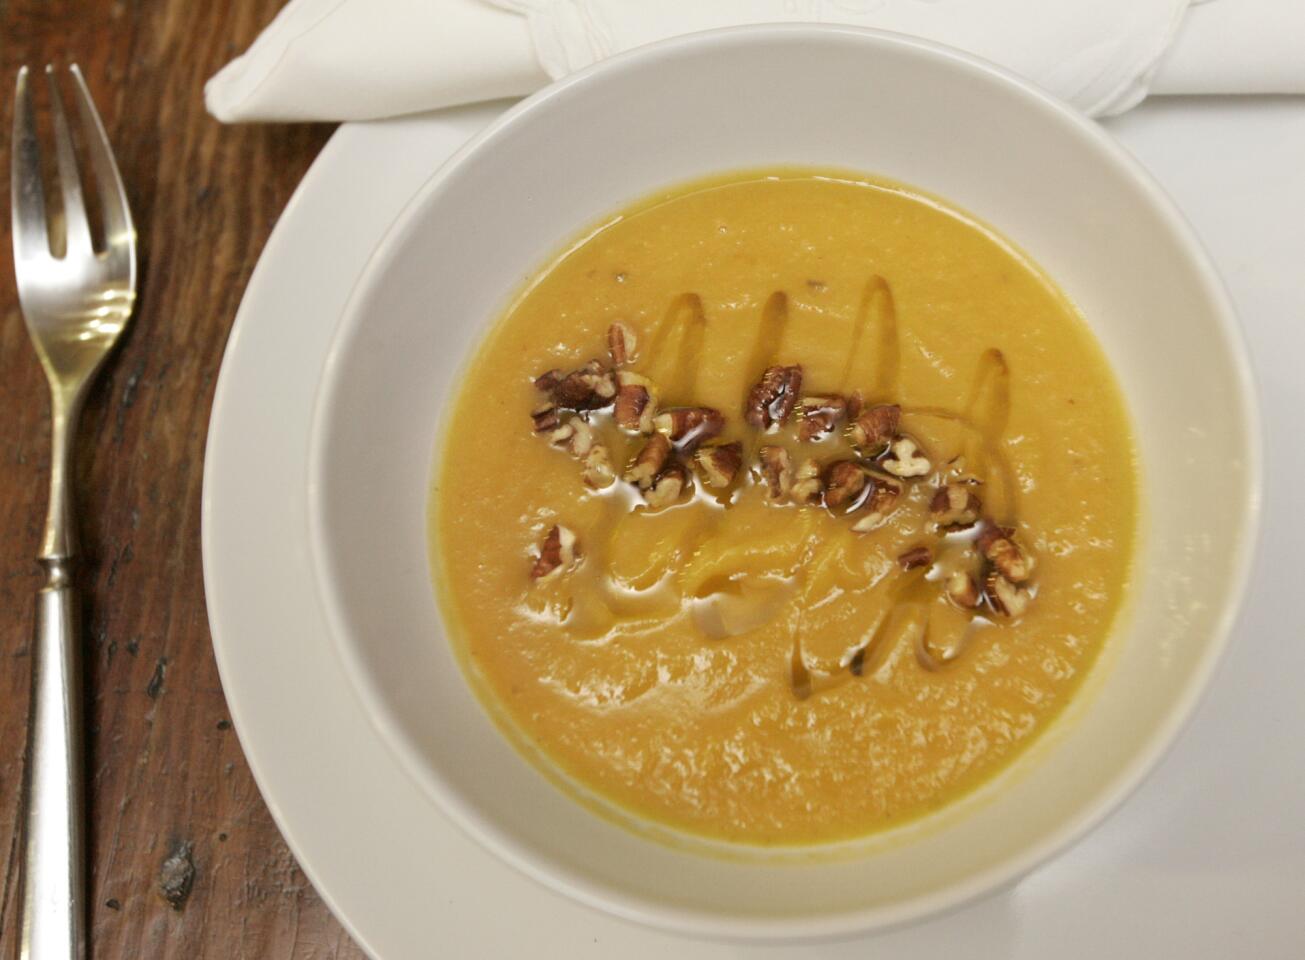 Roasted kabocha squash and celery root soup with maple syrup and brown butter